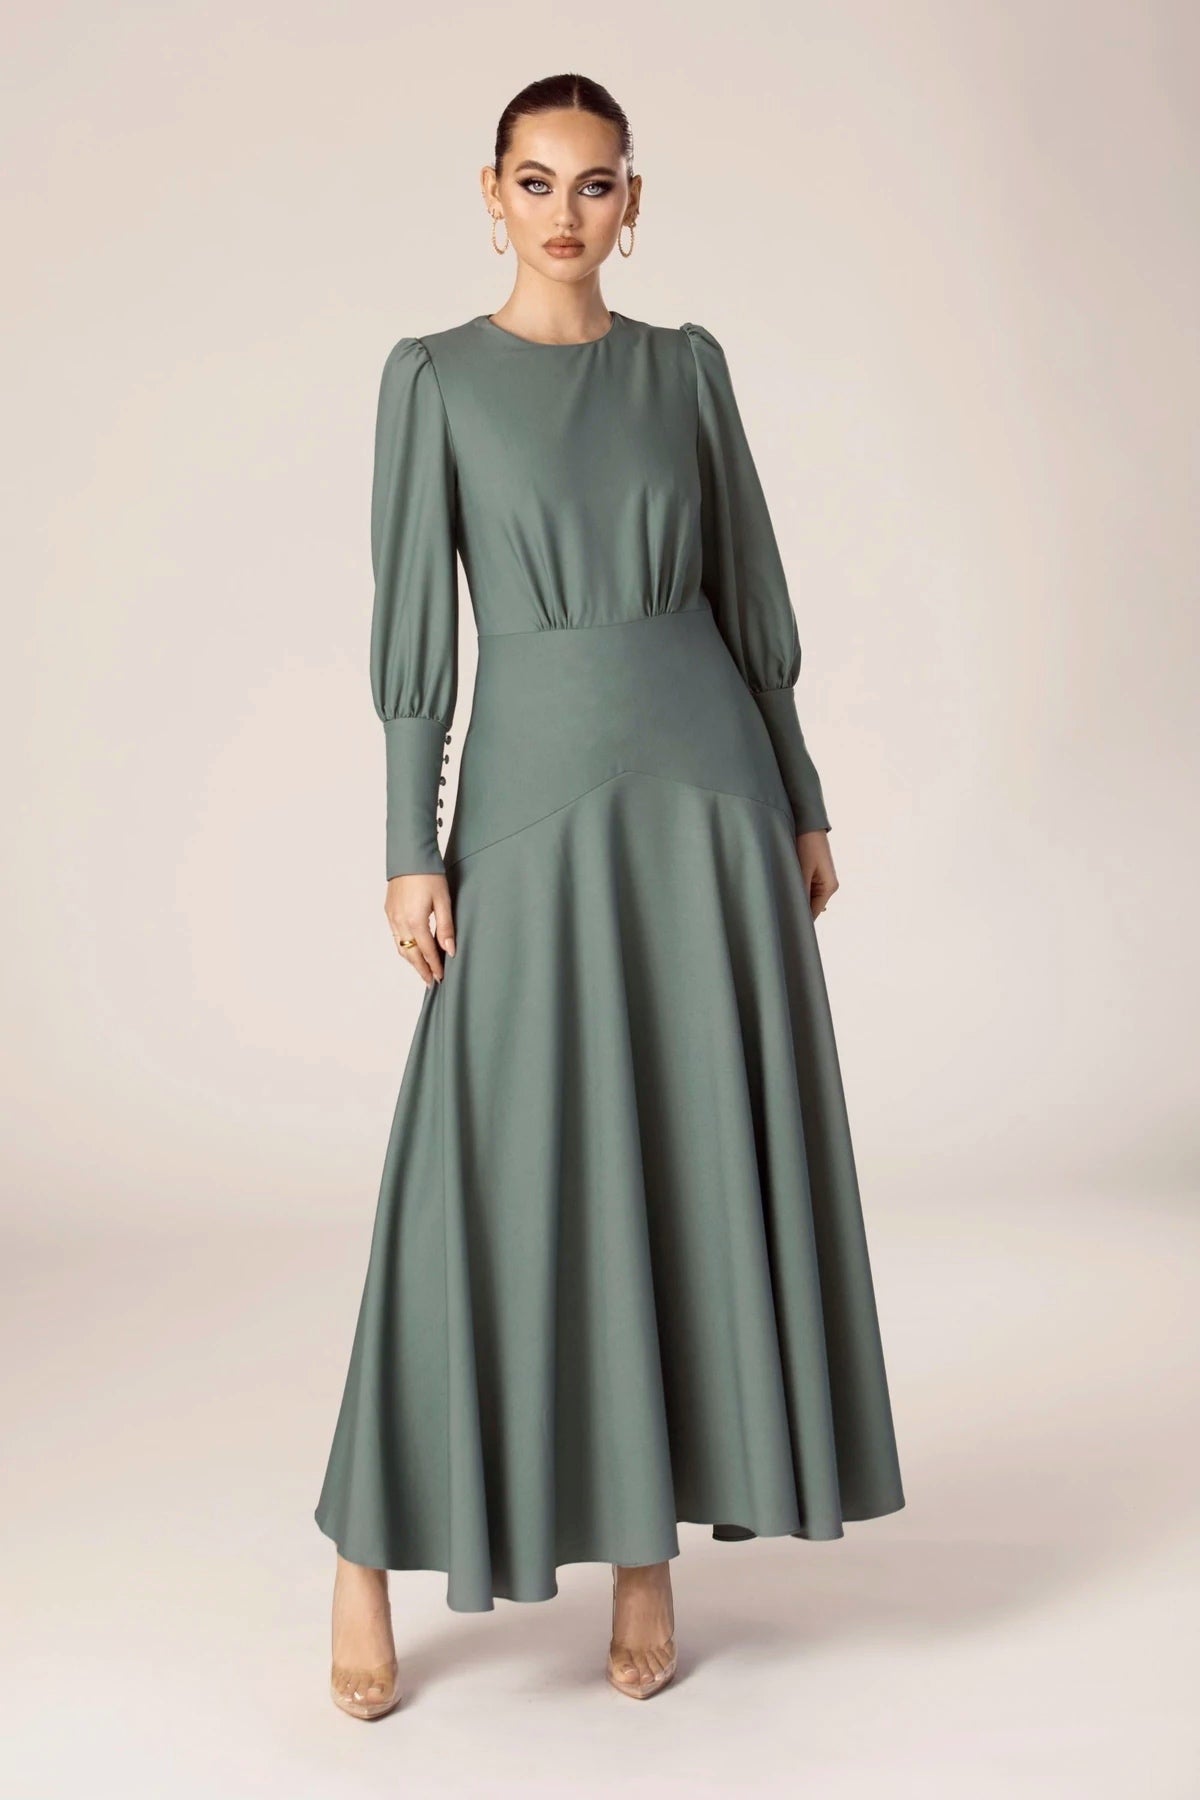 Veiled | Modest Maxi Dresses for Women – Page 4